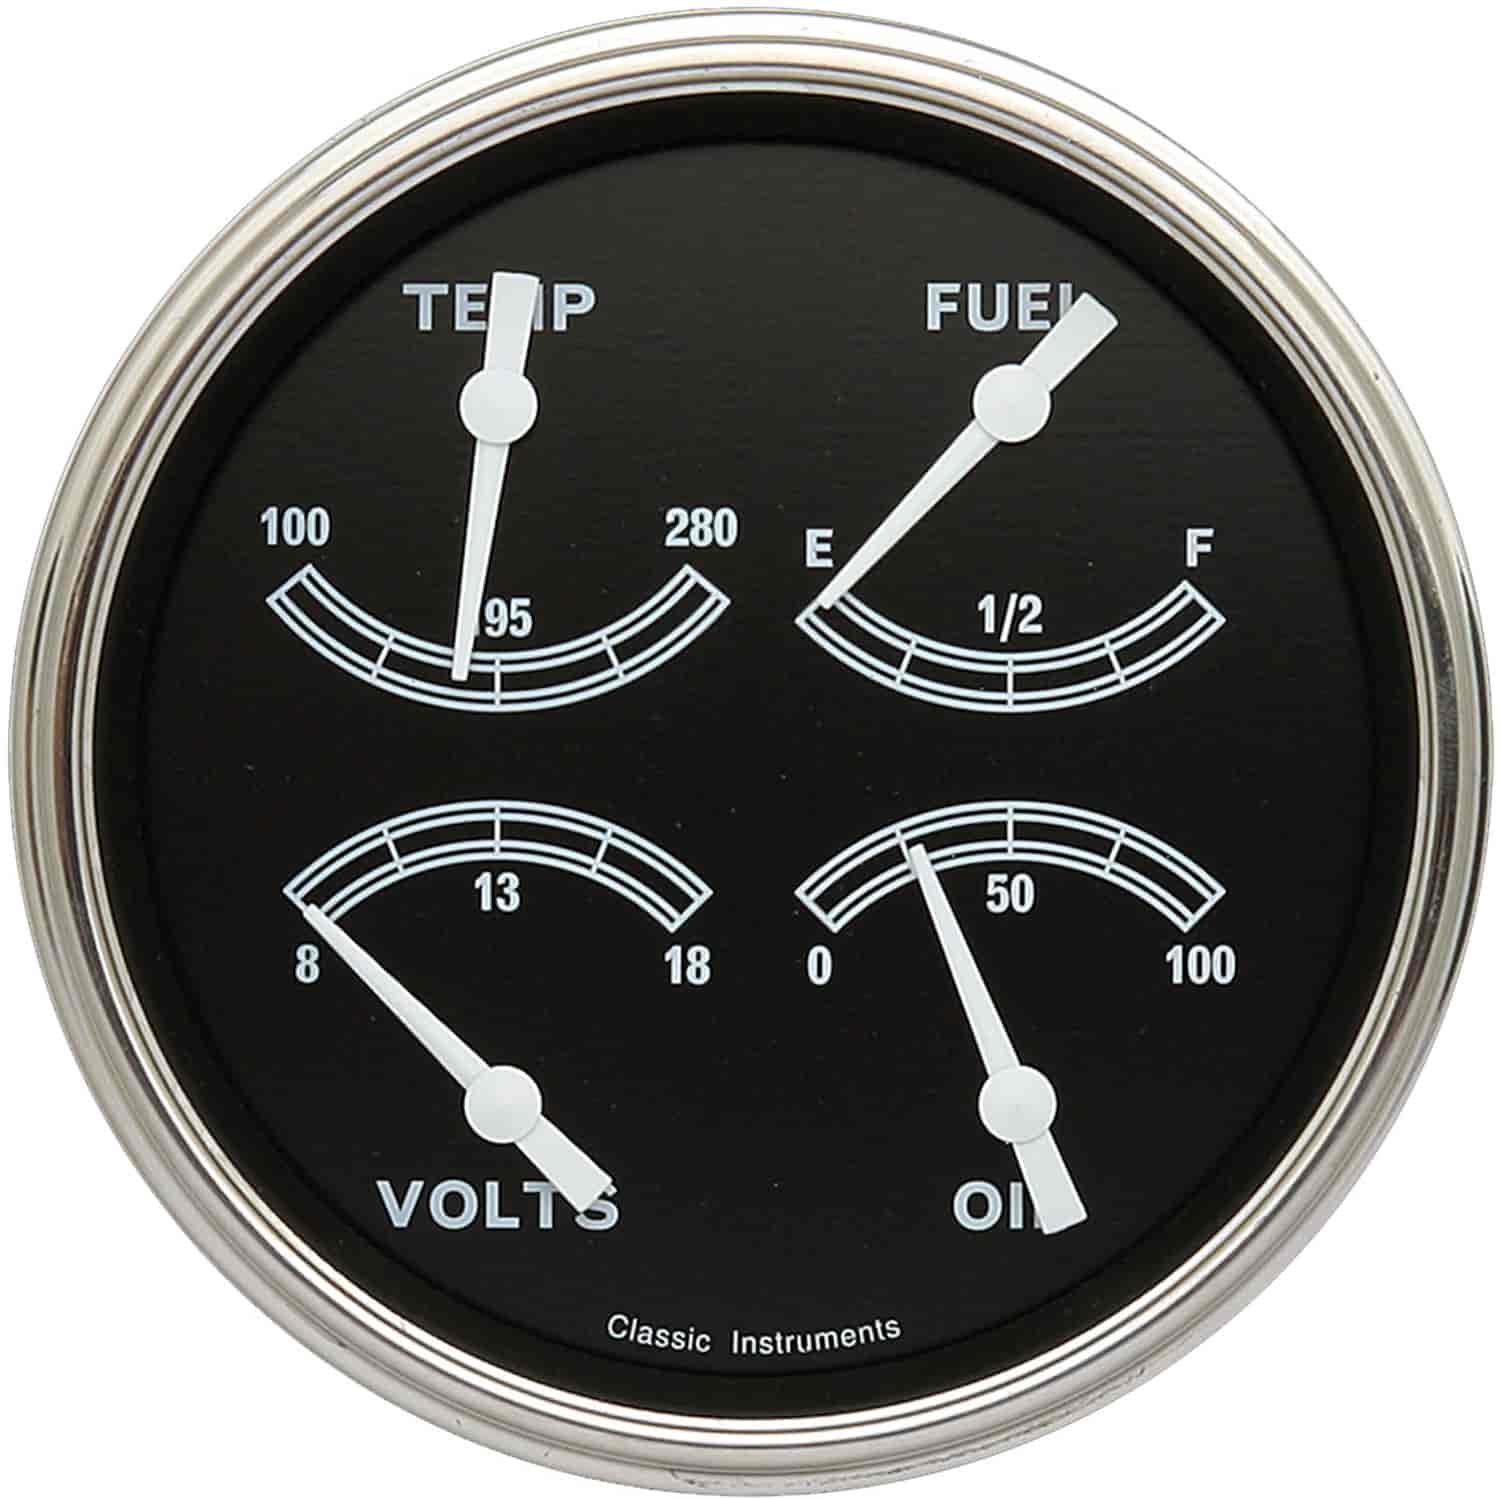 Traditional Series Quad Gauge 4-5/8" Electrical Includes: